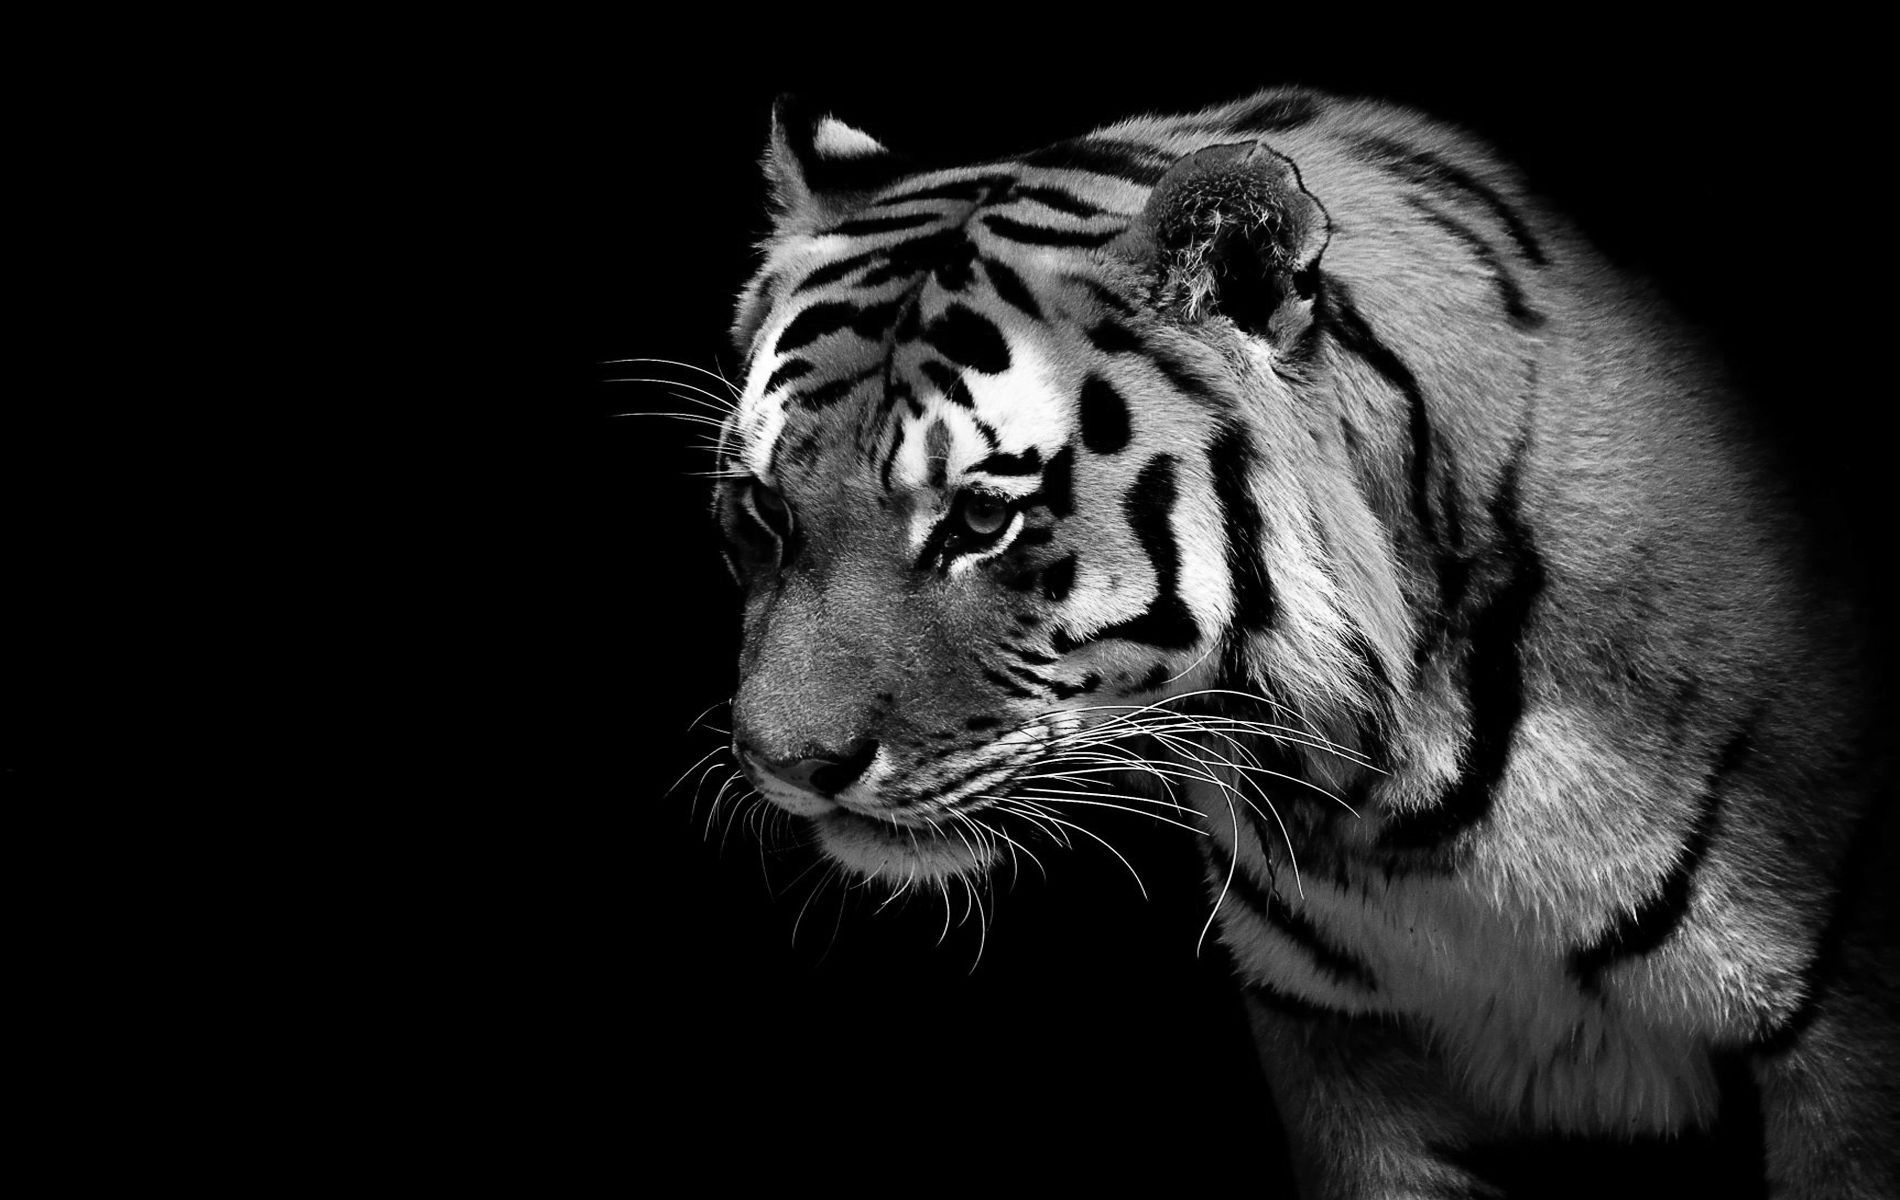 Black And White Tiger Wallpapers